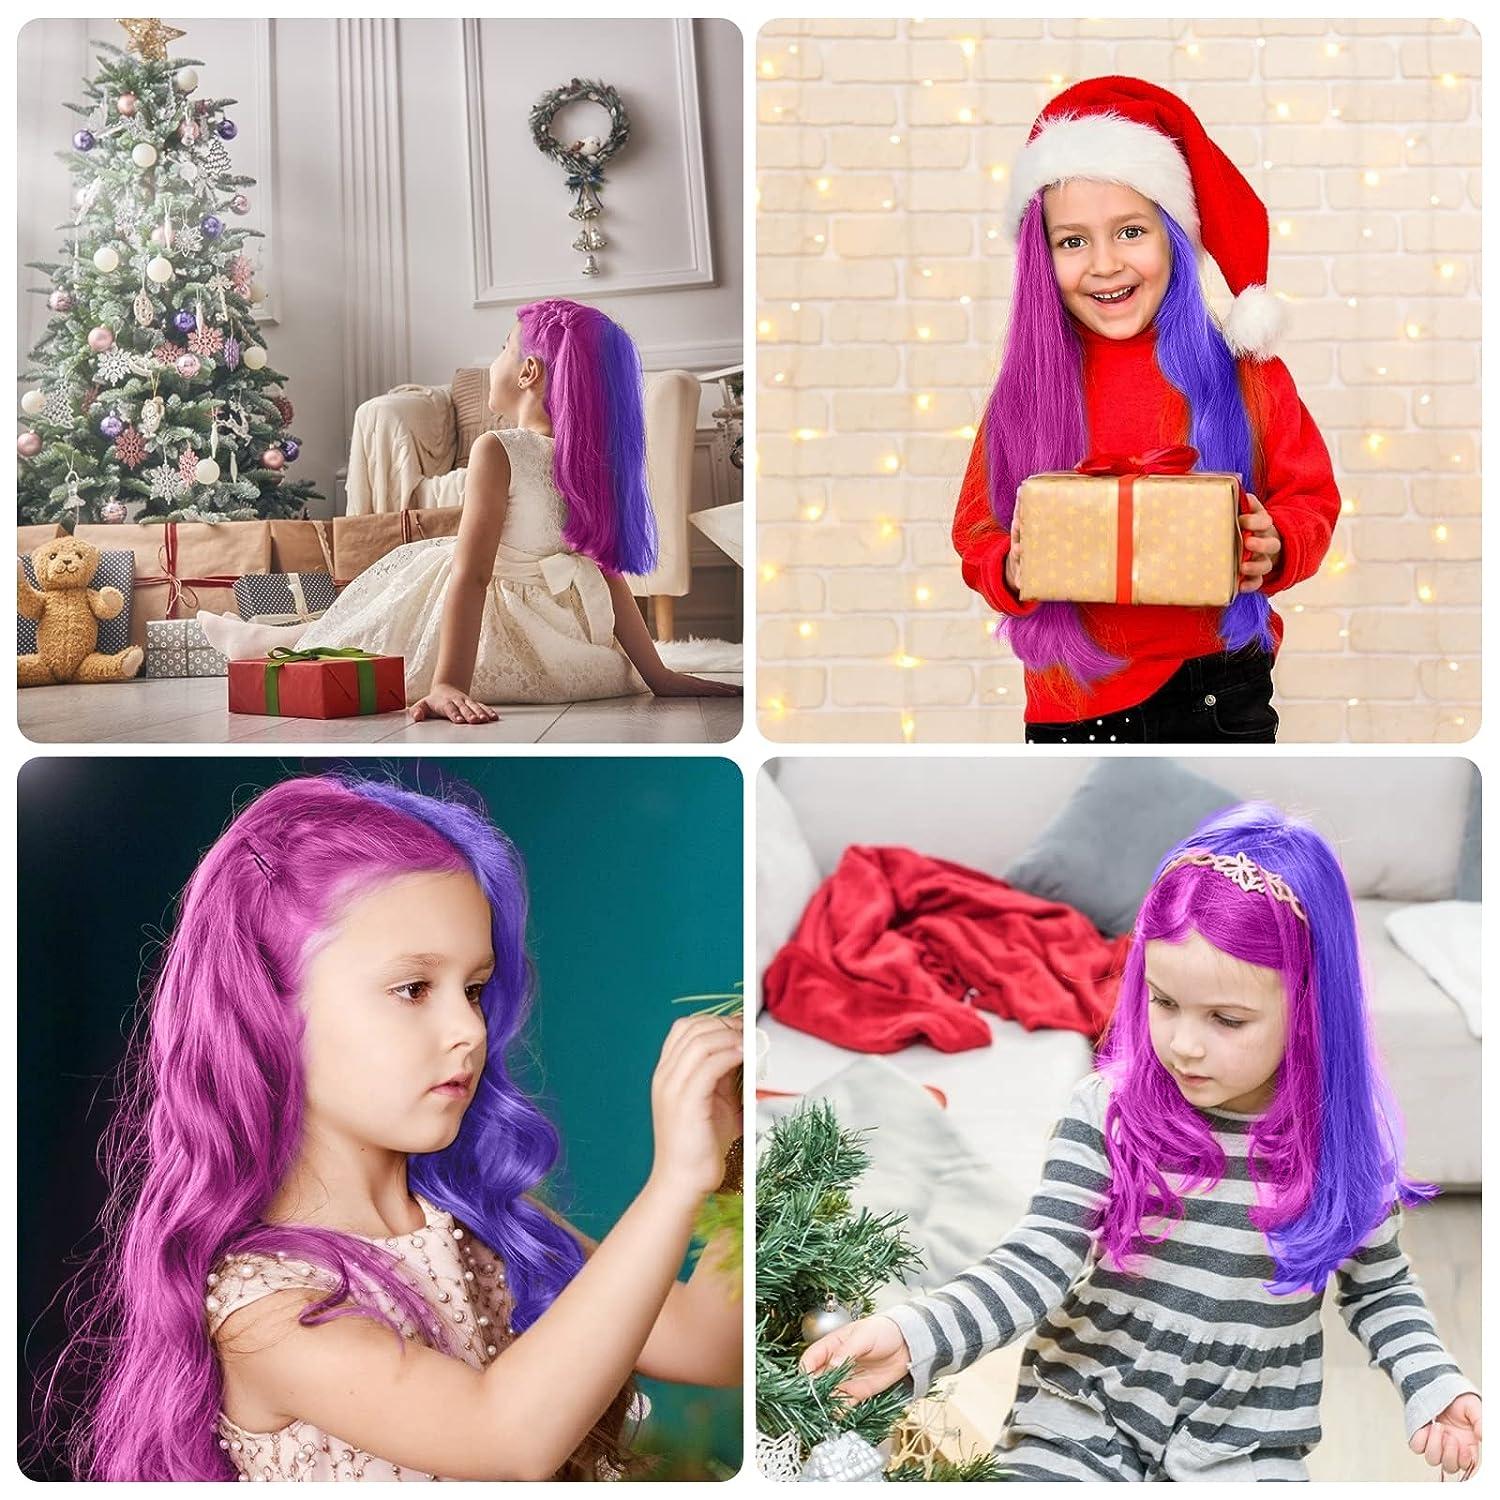 10 Color Hair Chalk for Girls Temporary Hair Color Dye for Kids,Washable  Hair Chalk Comb,Gifts for Girls Age 8-12,Best Creative Gifts for Children's  Day Christmas Halloween Cosplay Birthday Party New Year 